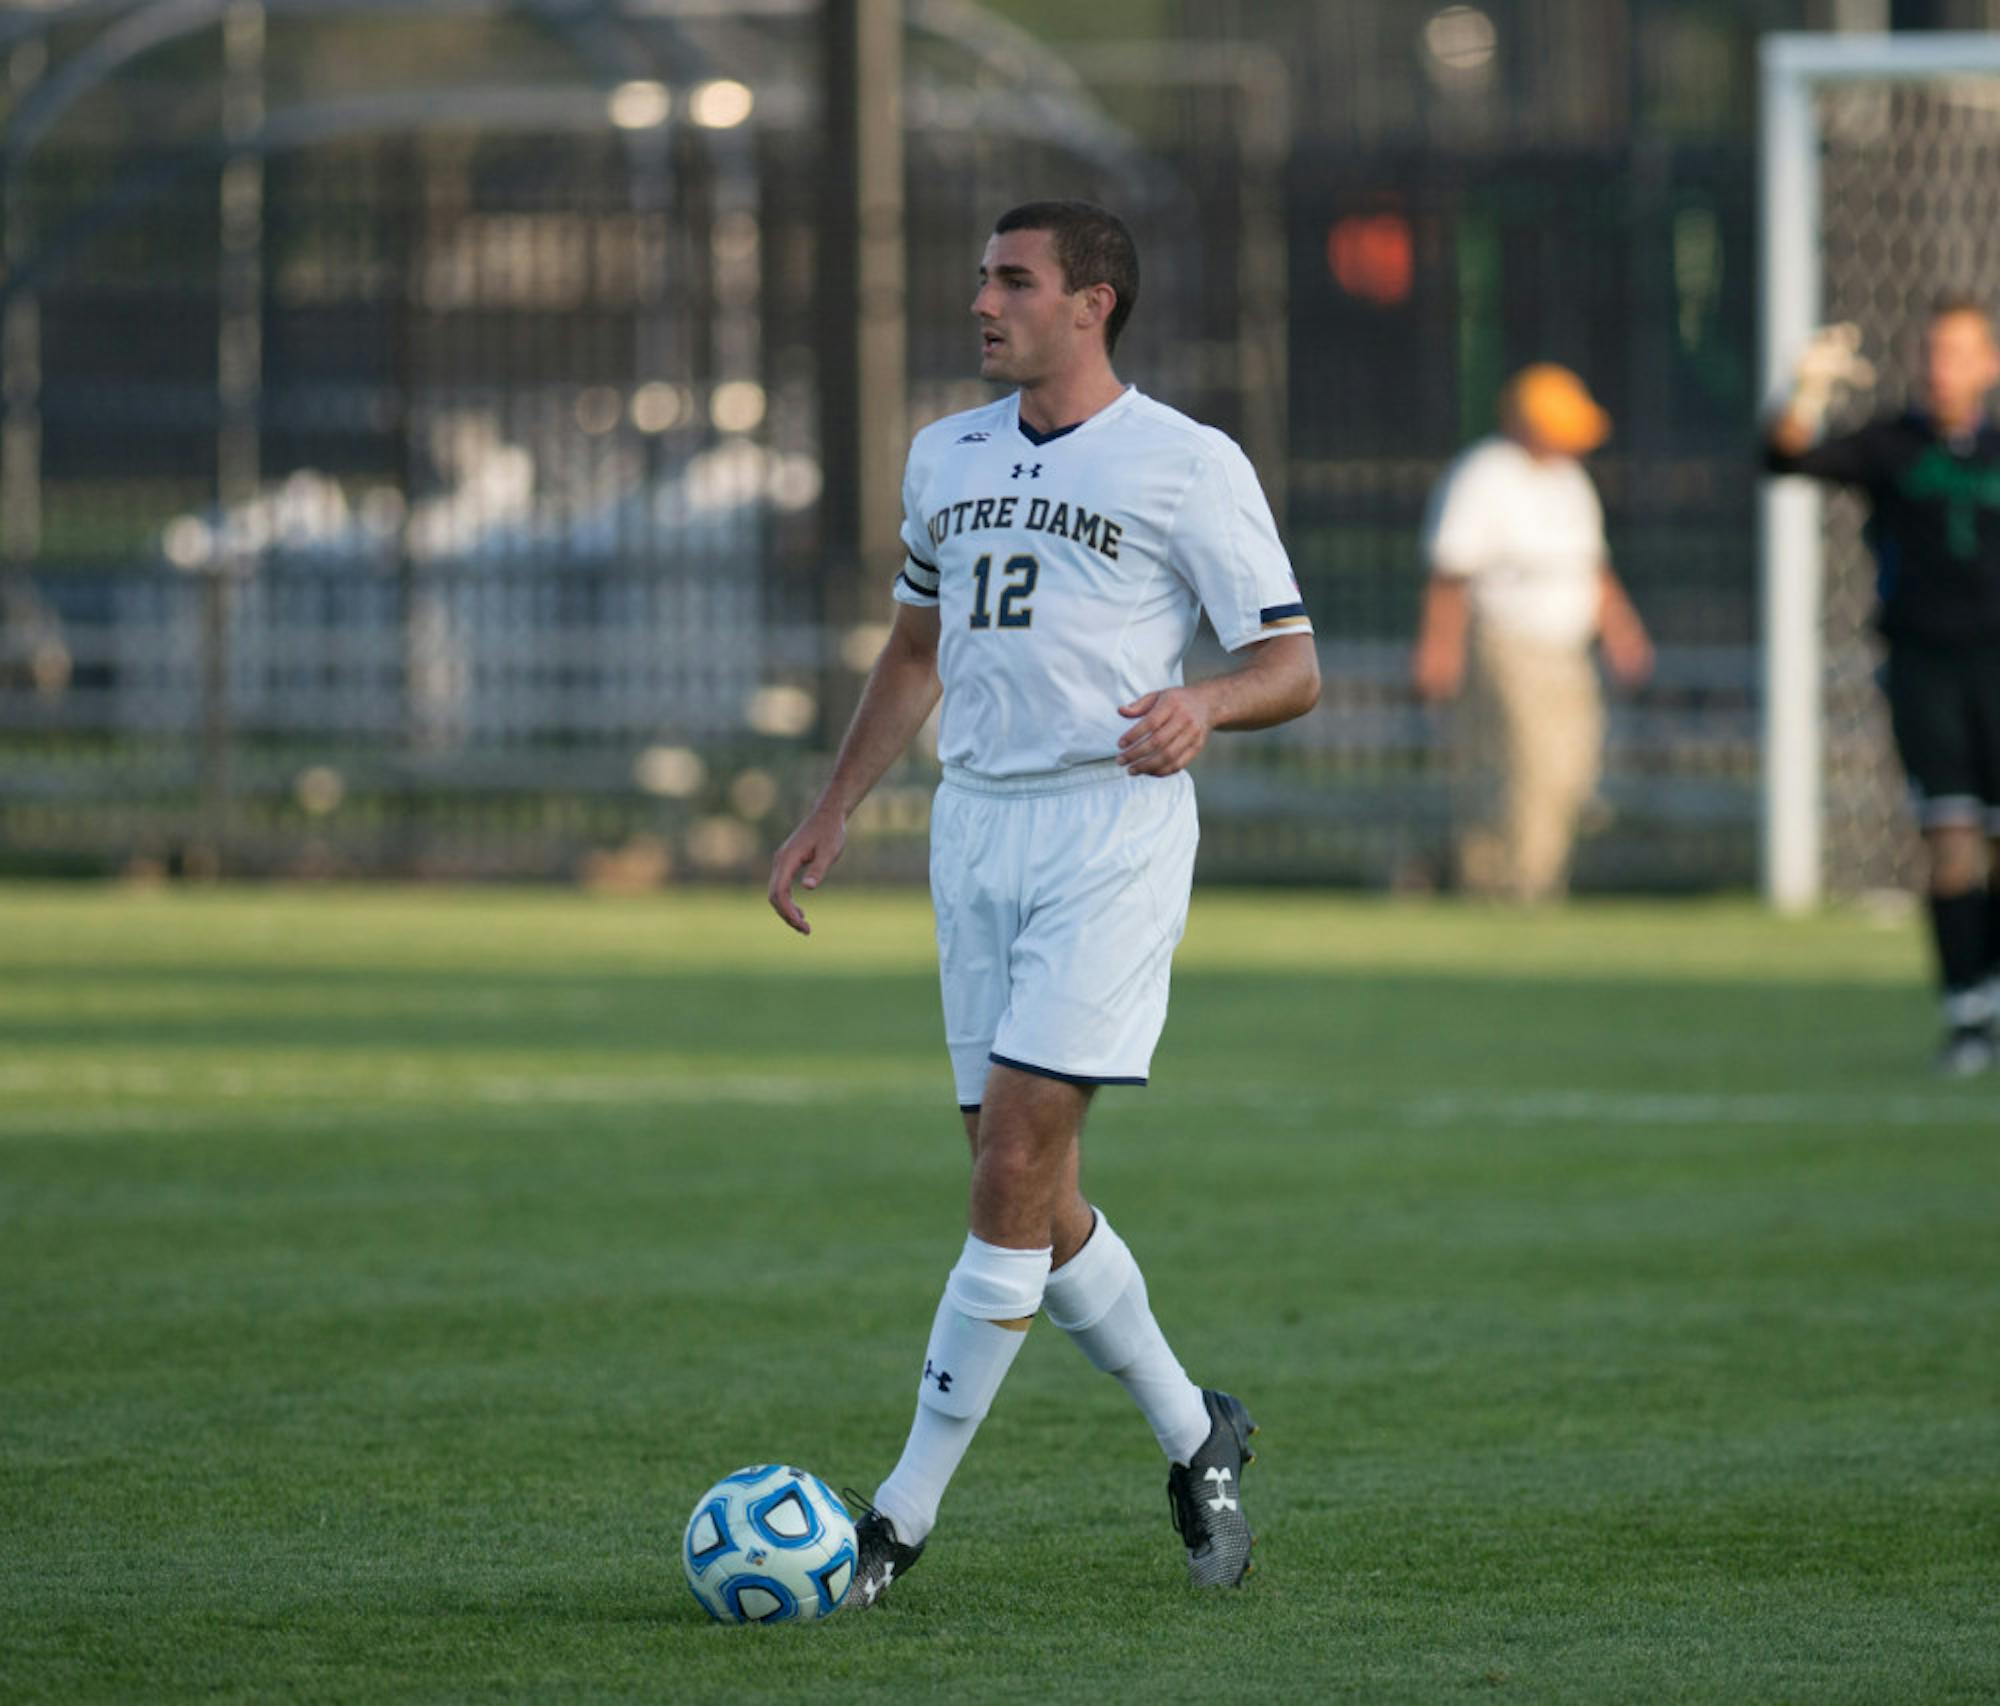 Graduate student defender Andrew O’Malley scans the field during a 1-0 home loss to Kentucky on Sept. 8.